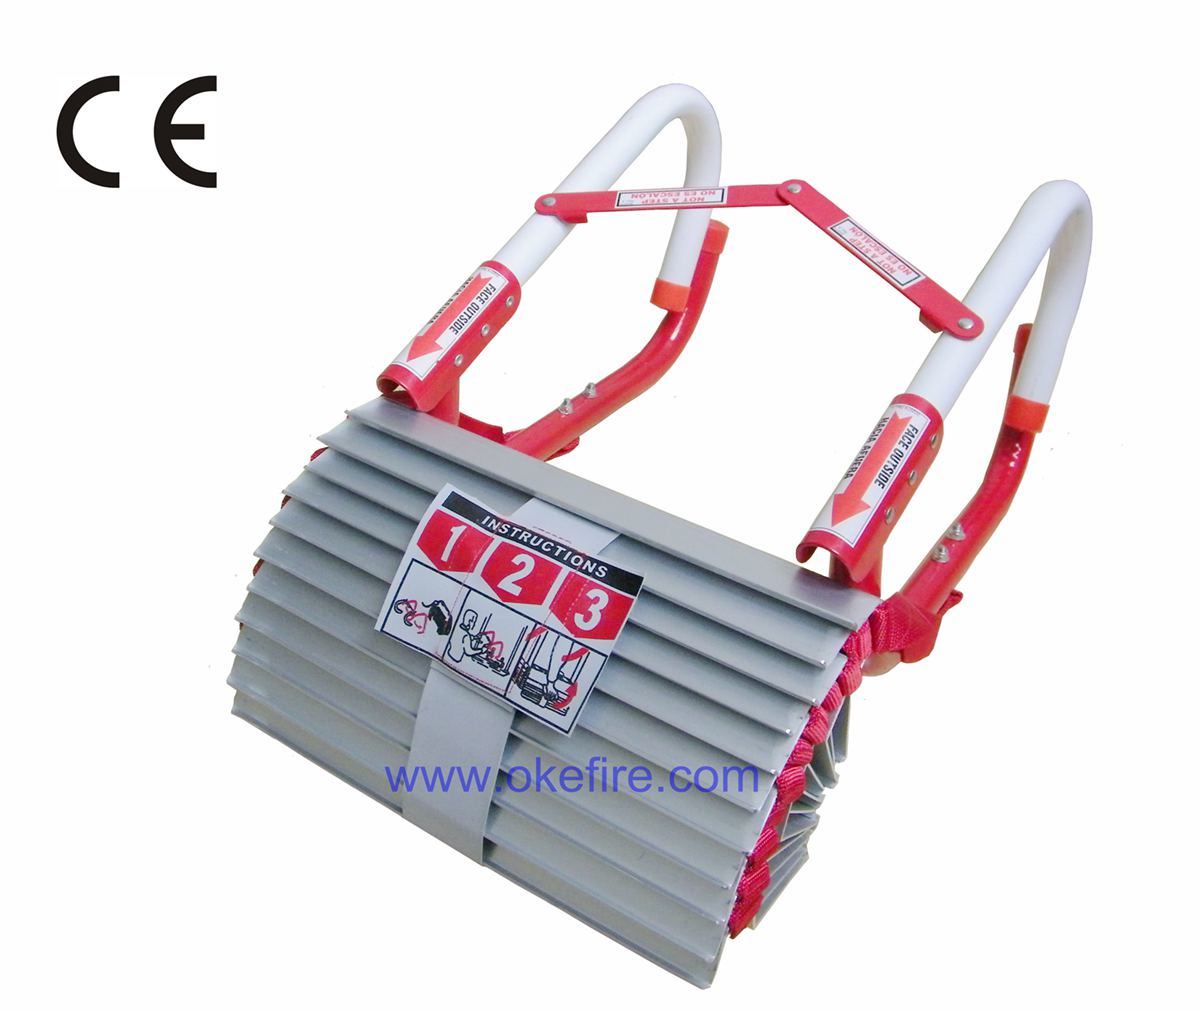 Fire Escape Ladder with CE